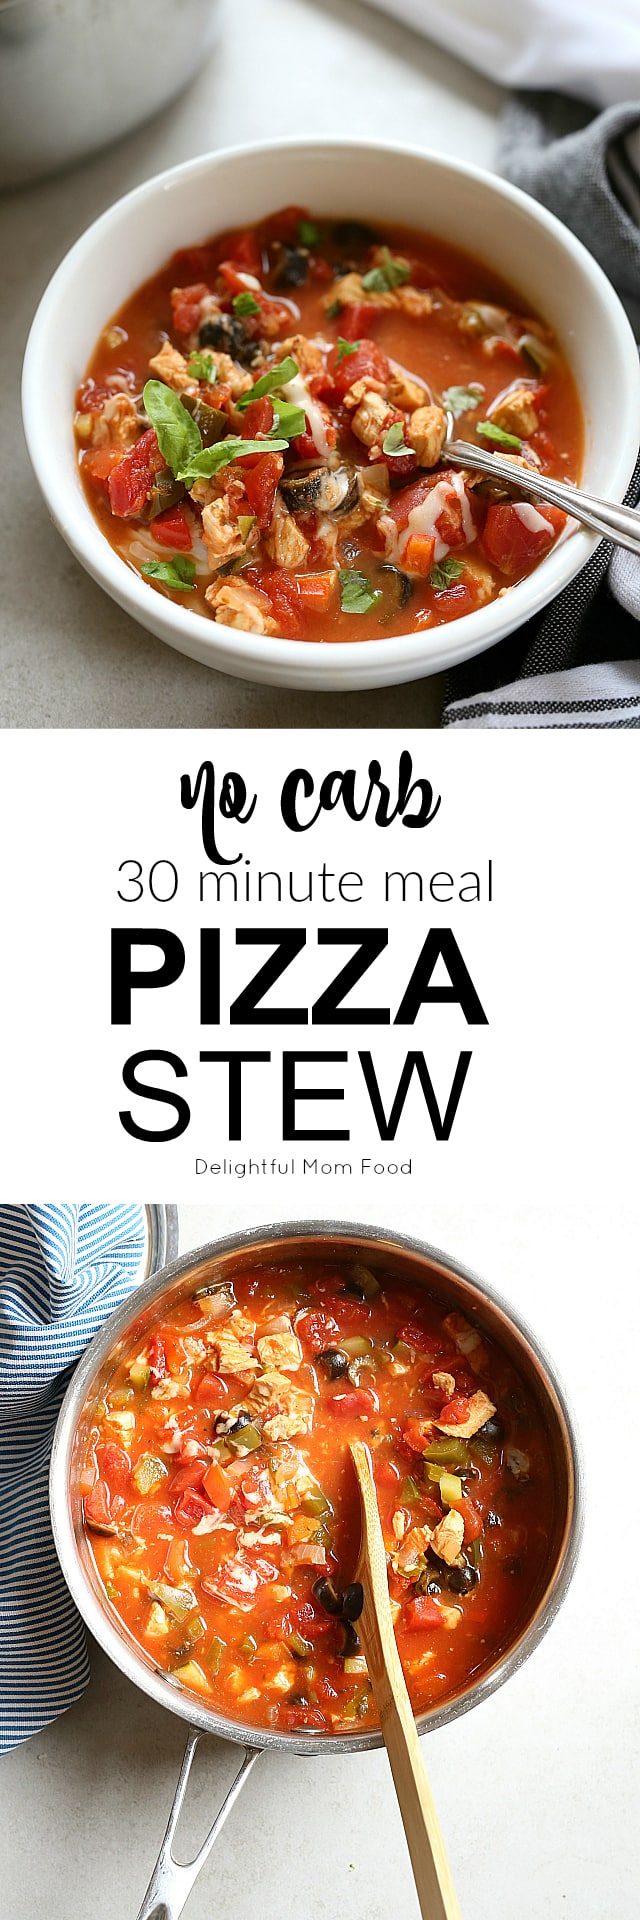 Pizza stew is a great way to use up all those leftover Italian pizza toppings without adding any carbs to your diet! This soup takes as little as 30 minutes and uses hardly any dishes. No deep dish here! Just your favorite vegetables, mushrooms, pepperoni, Sicilian chicken and the mozzarella cheese is optional!